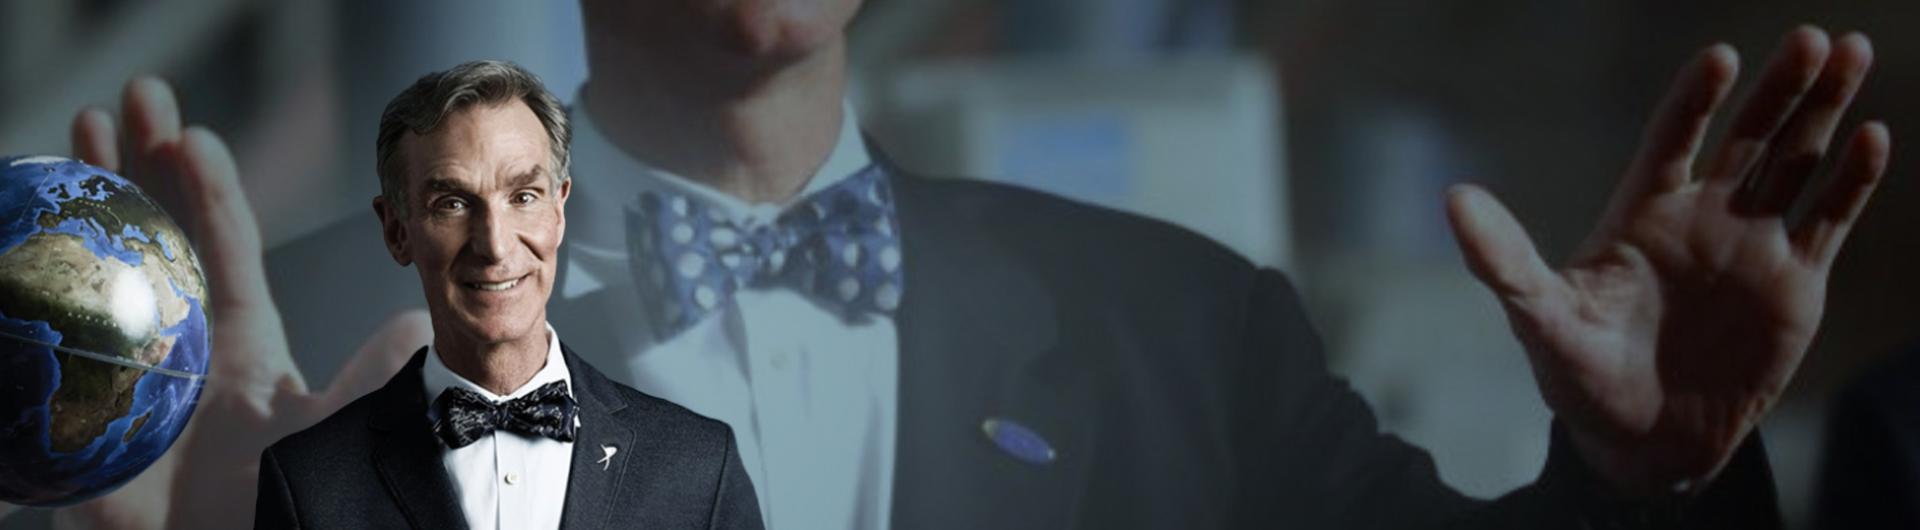 Bill Nye in a bow tie smiling in front of a background of himself, larger.